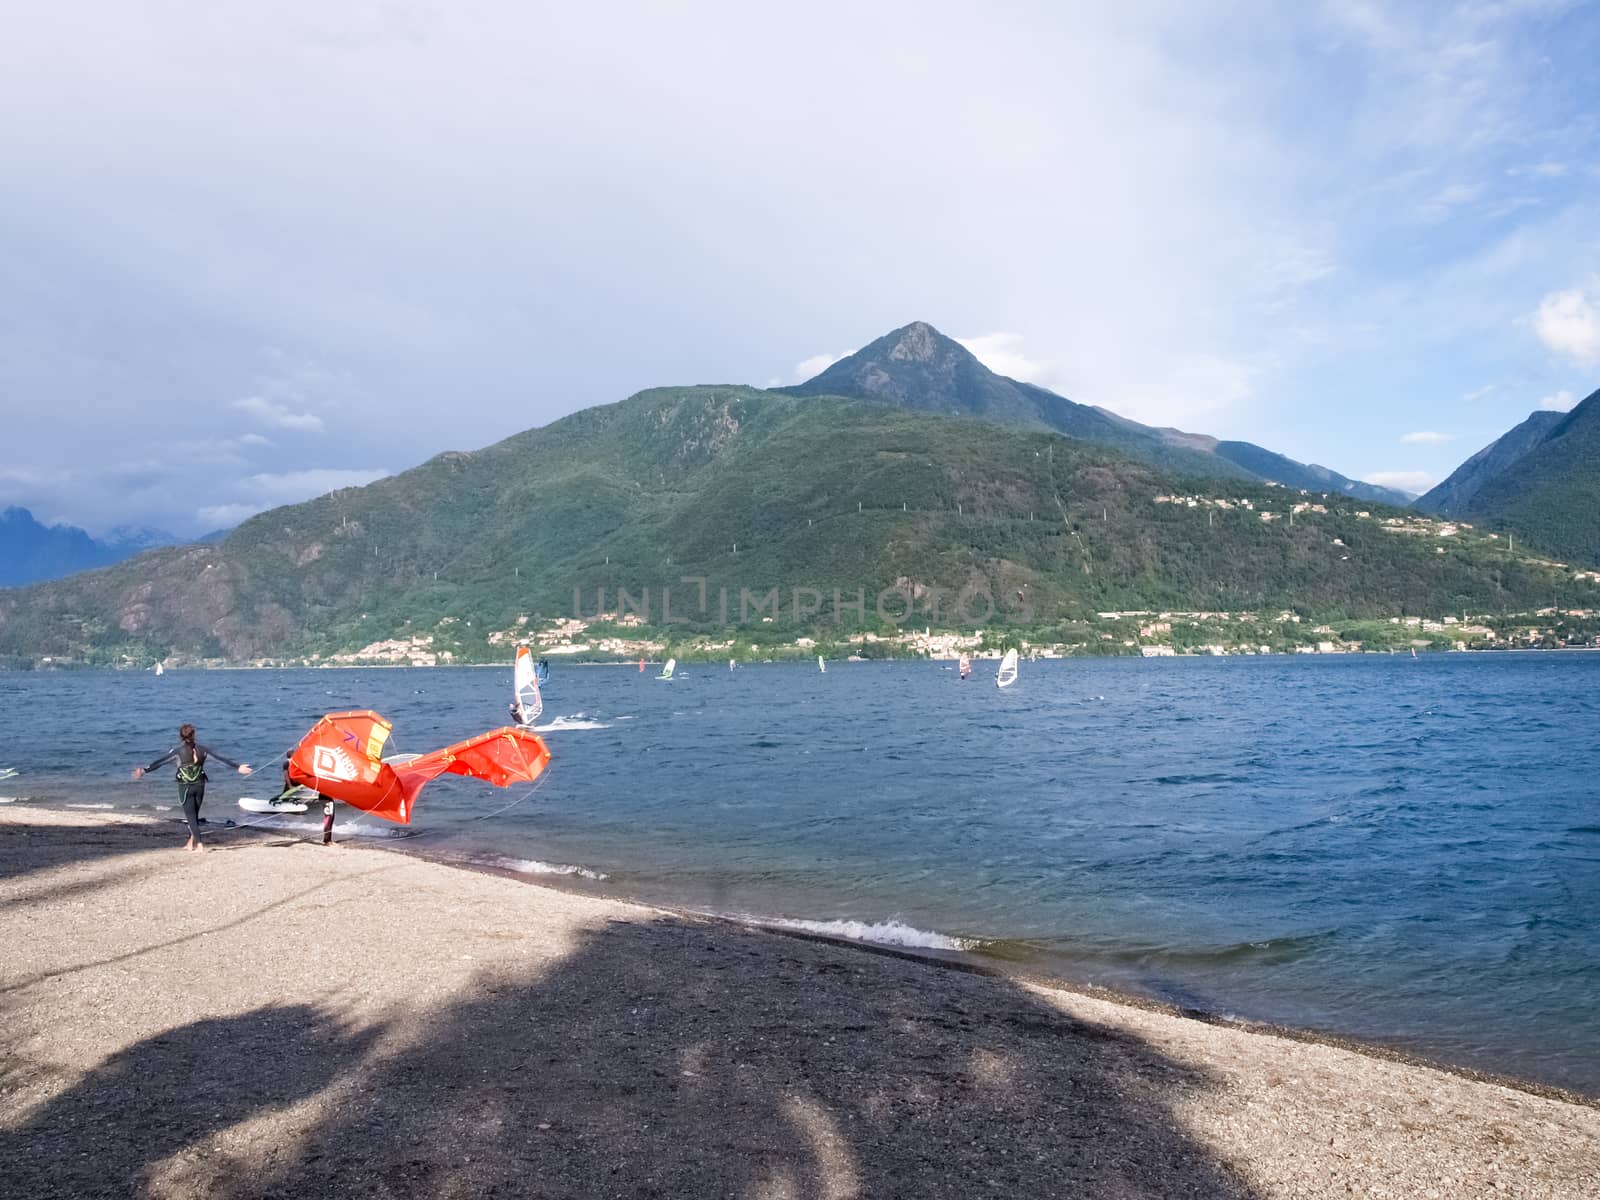 Cremia, Italy - September 5, 2015: Several windsurfing and kitesurfing with thermal wind from the south on Lake Como.